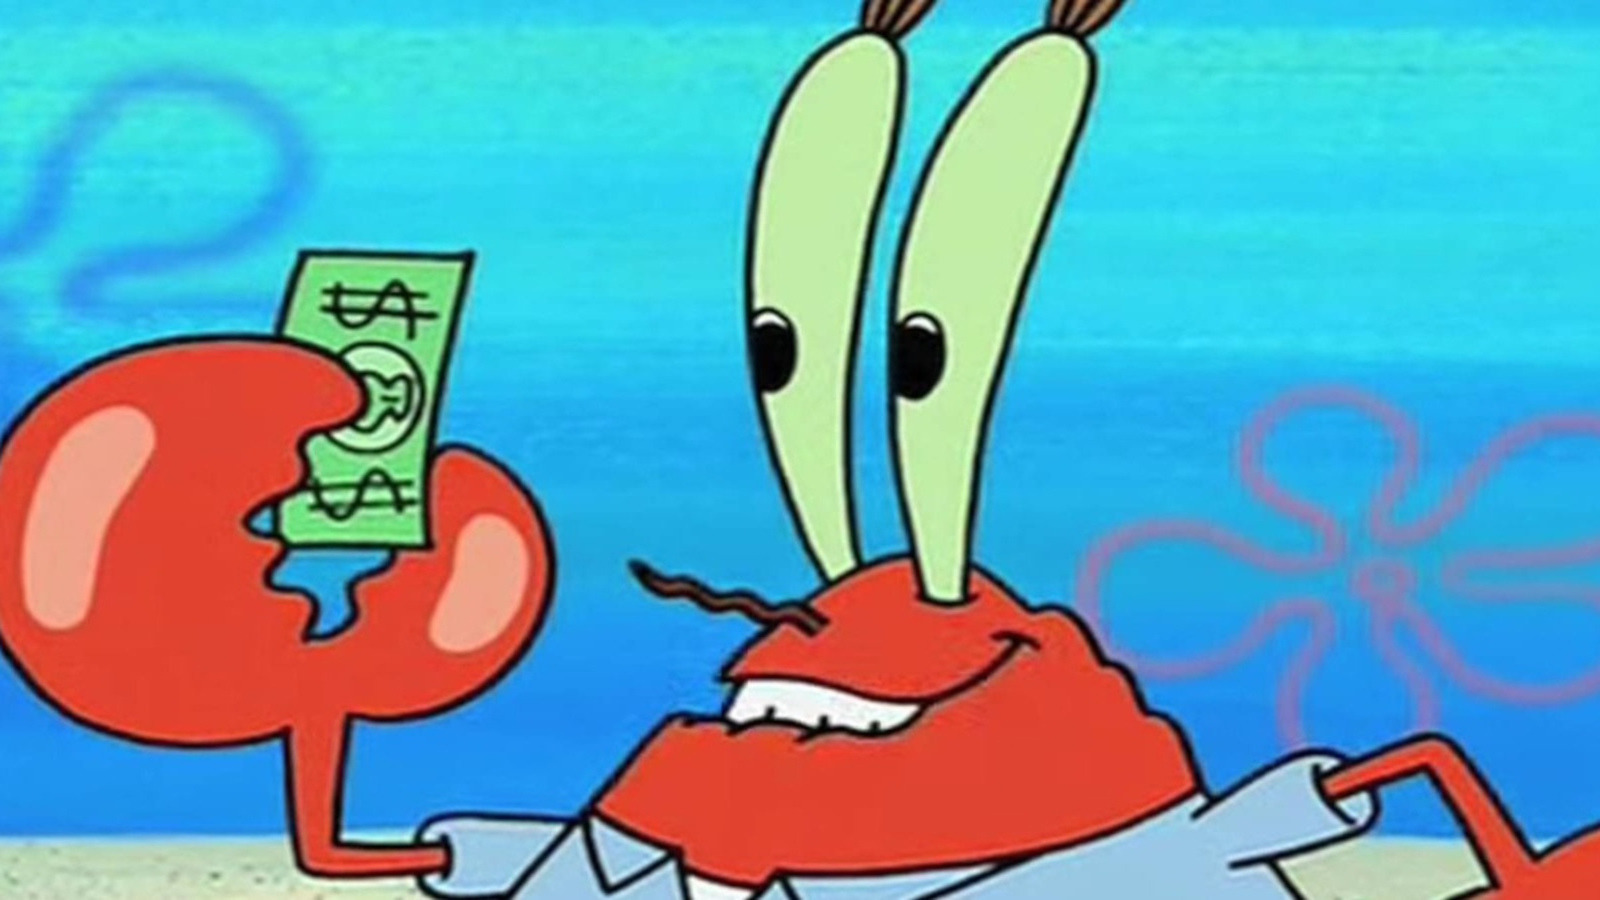 ...has been part of many people's childhoods for decades as Mr. Krabs....